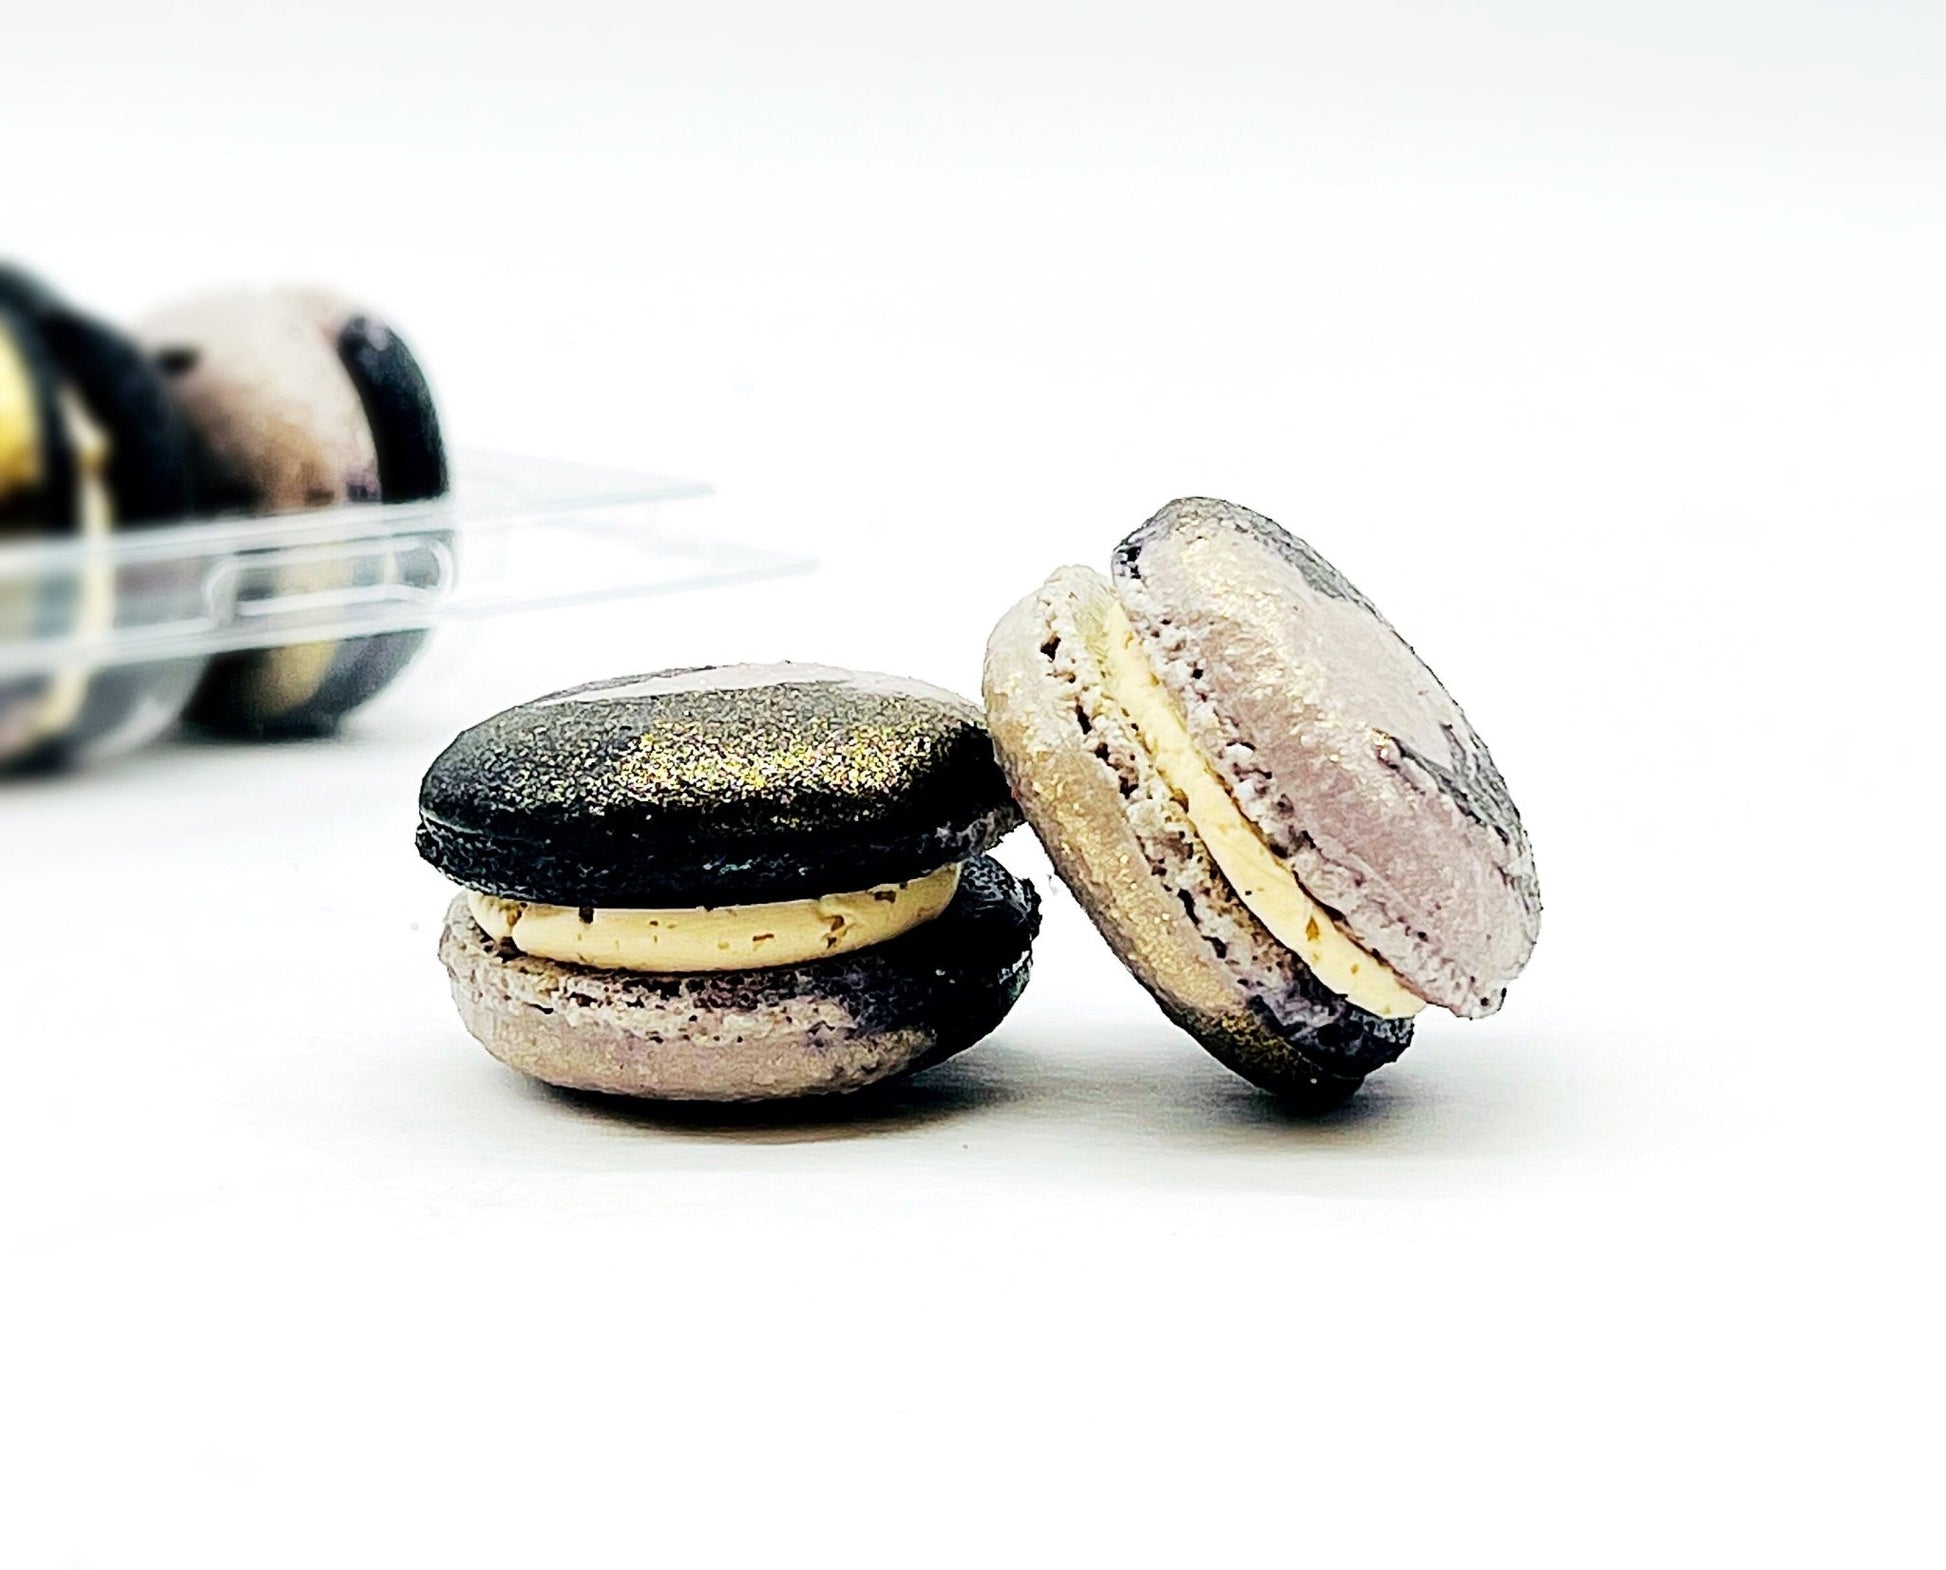 Space Edition Mac | The Moon French Macaron (Root Beer Flavor) | Available in 6, 12 & 24 - Macaron Centrale6 Pack